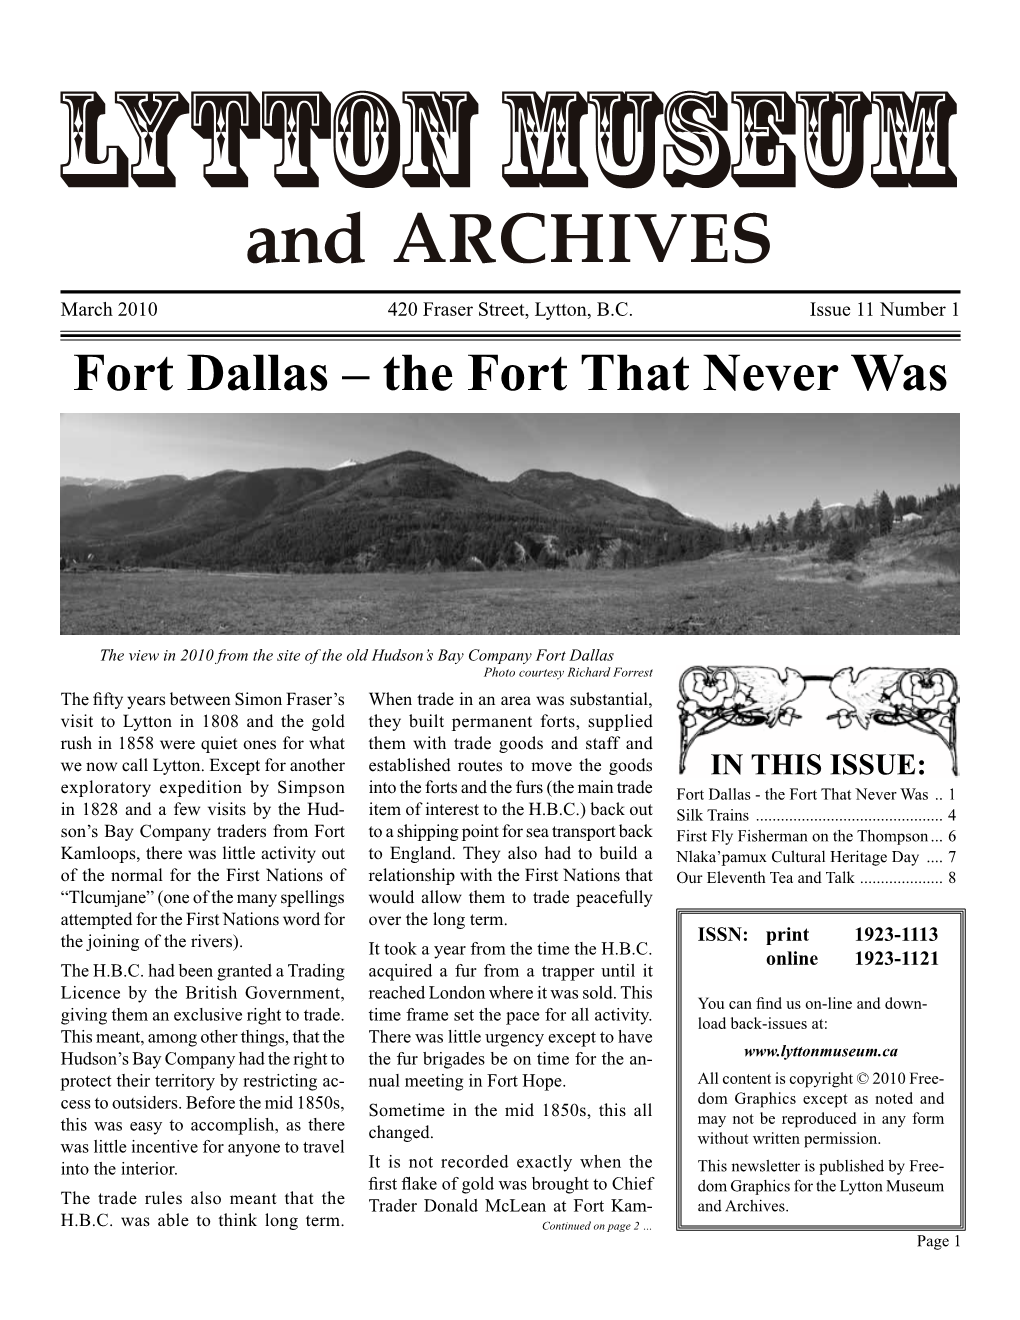 Fort Dallas – the Fort That Never Was